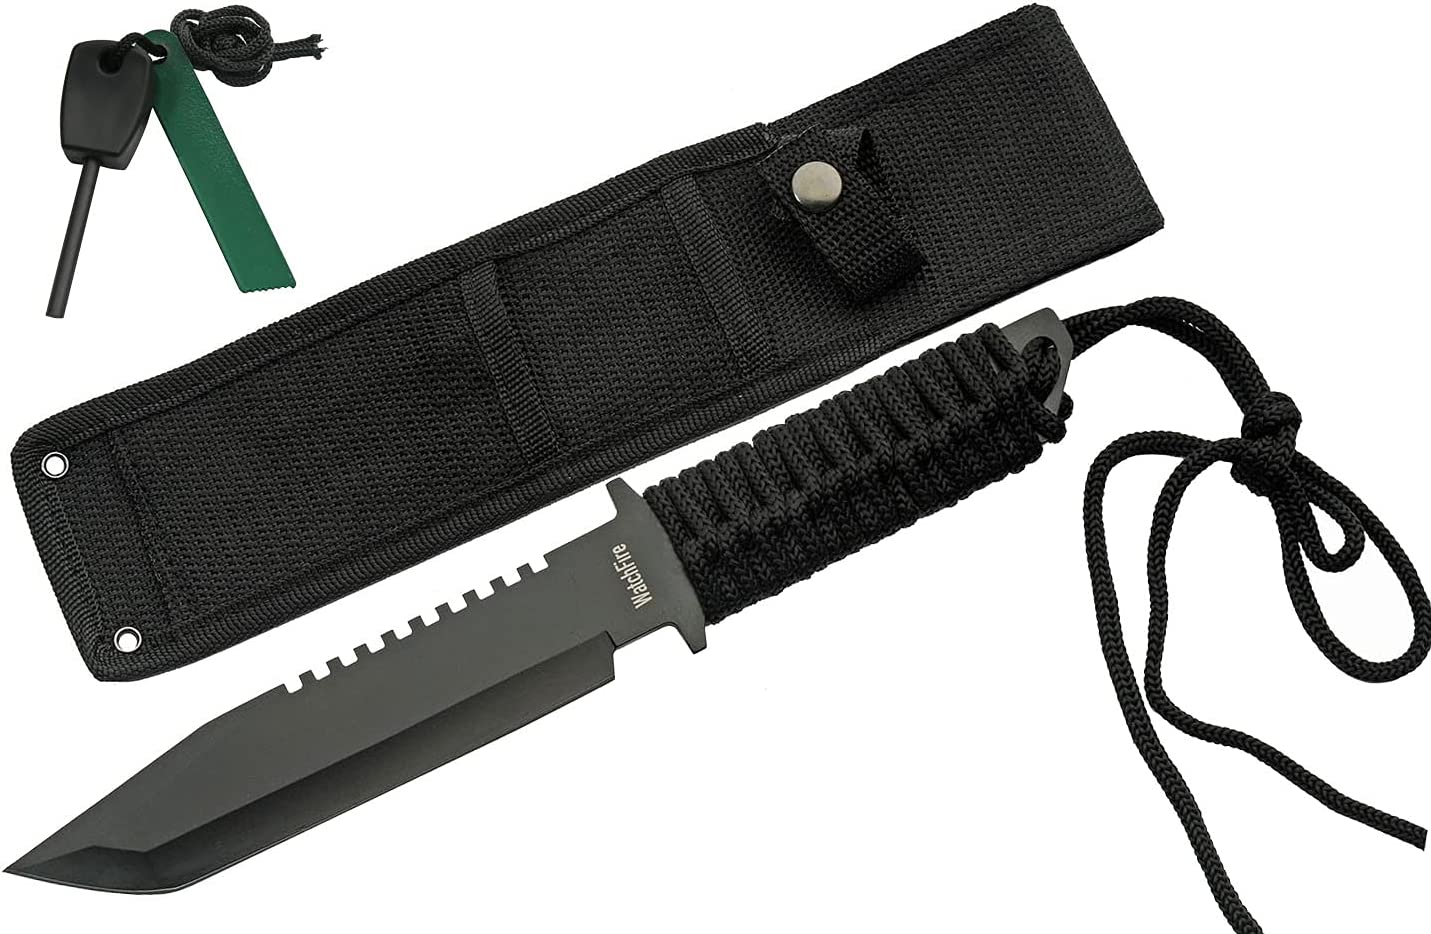 SZCO Supplies 11” Nylon Wrapped Tanto Blade Survivor Knife with Fire Starter and Sheath, Black, (211551)